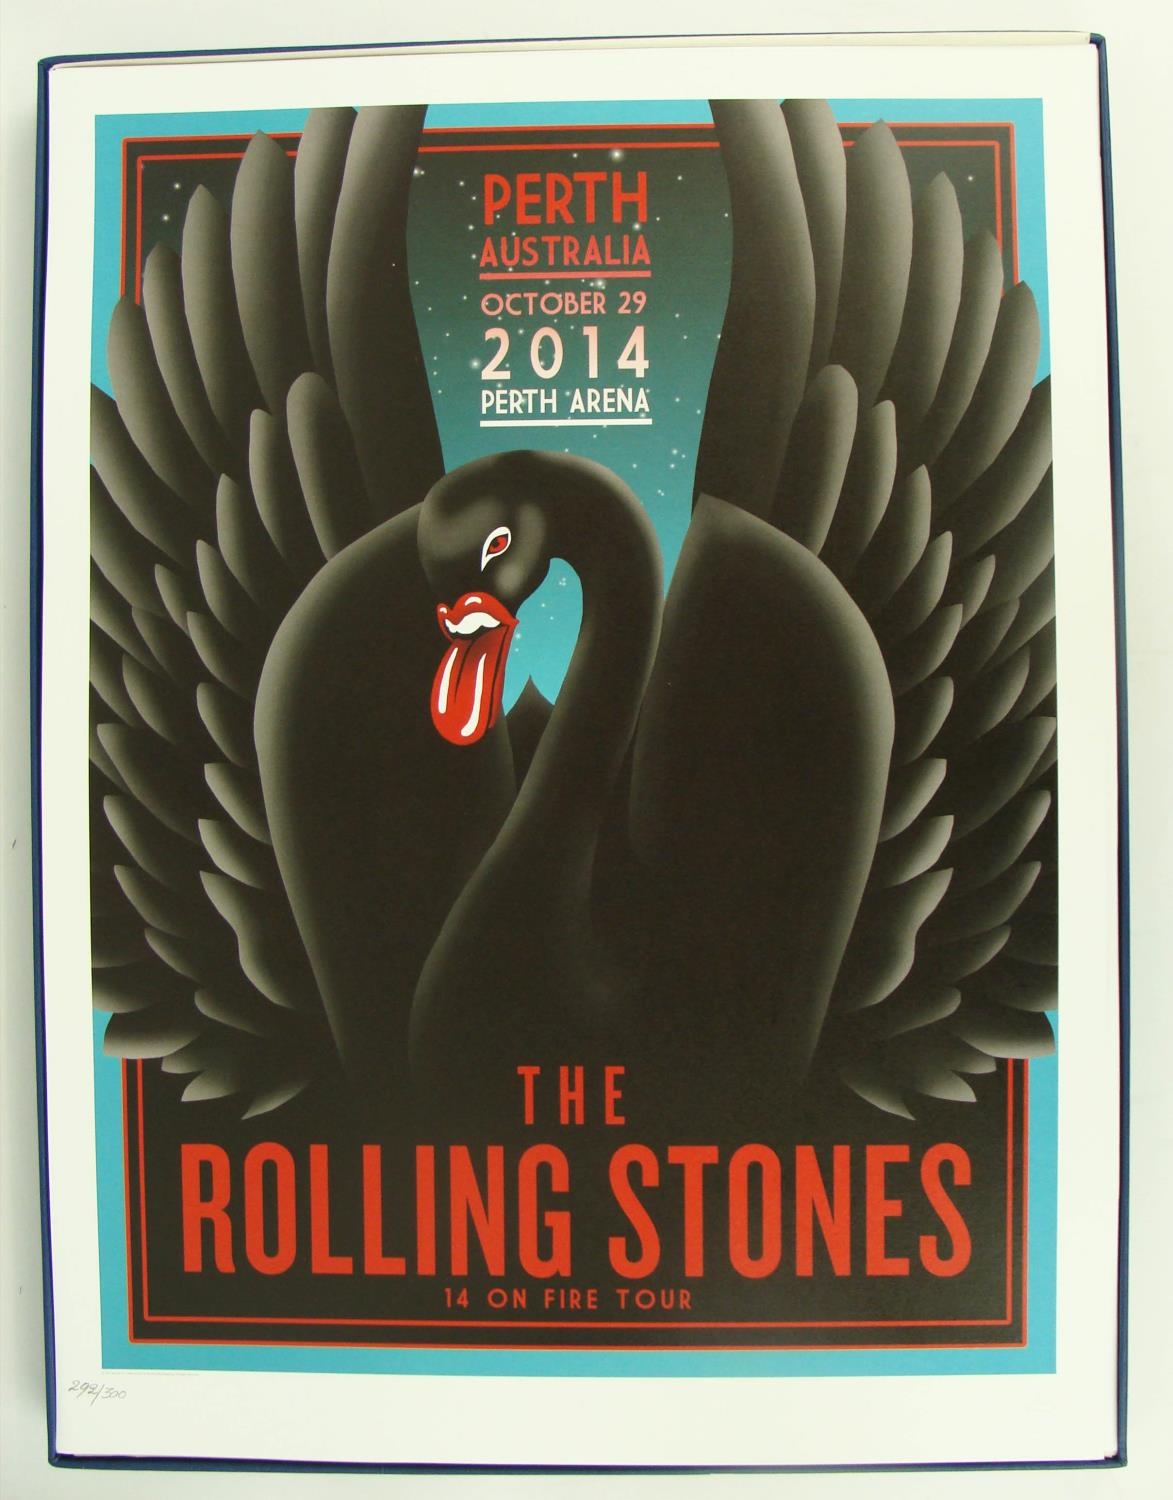 ROLLING STONES '14 on FIRE' BOX SET, of 13 lithographic posters from the 2014 Australia and New - Image 4 of 21